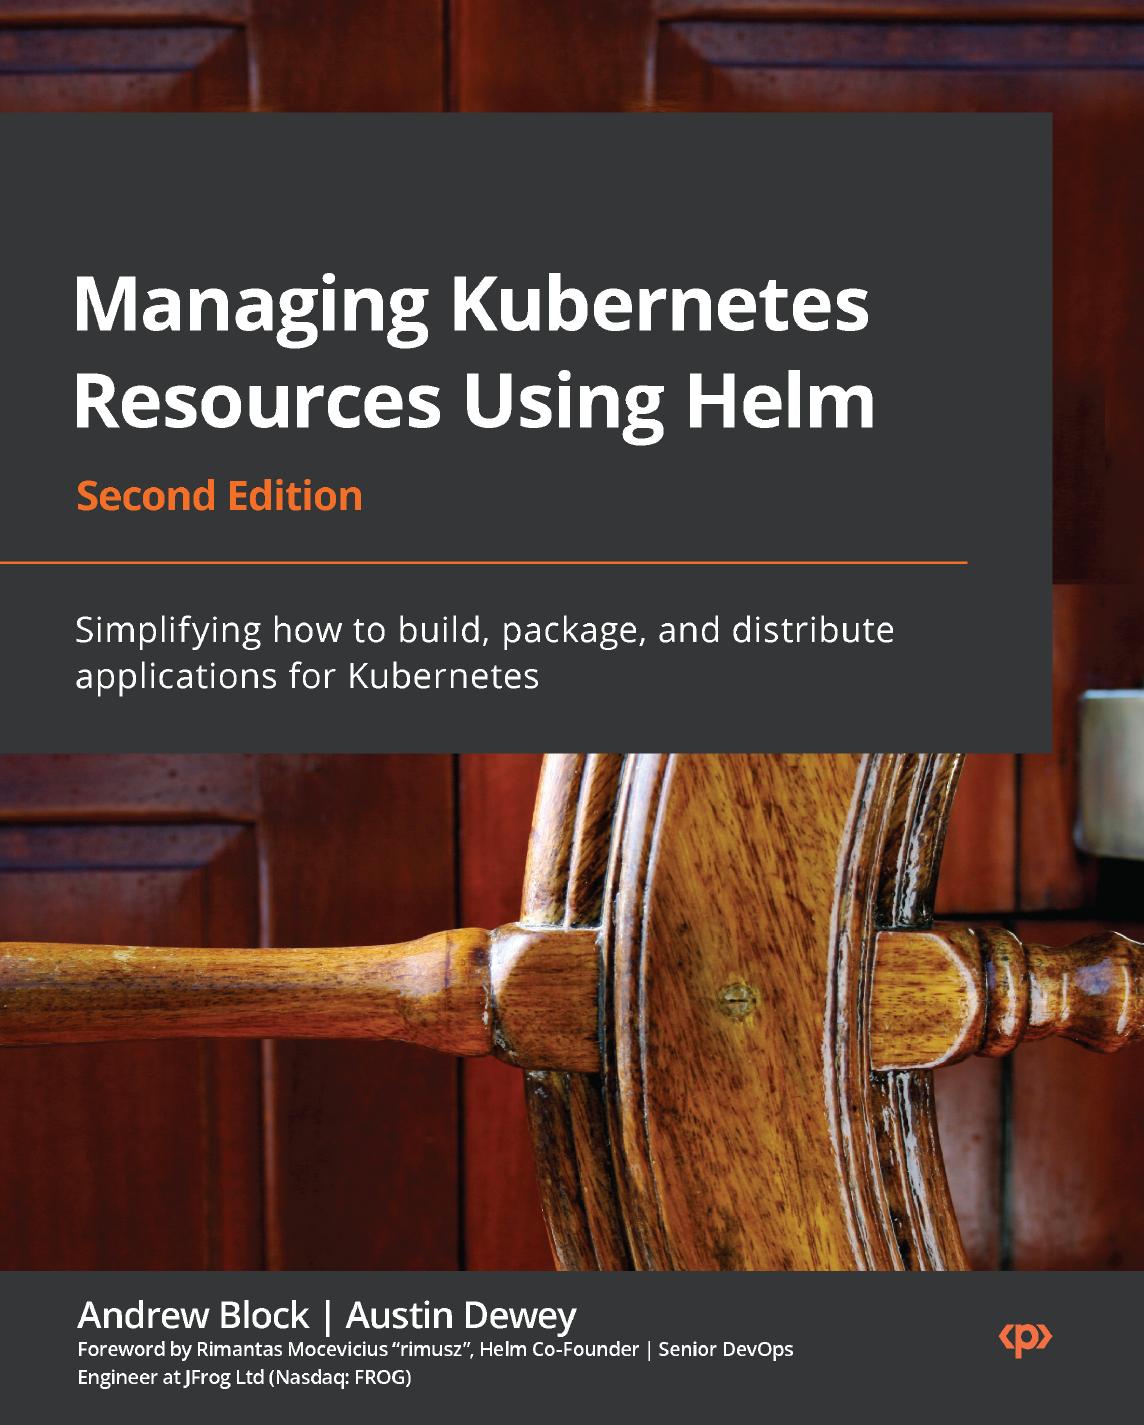 Managing Kubernetes Resources Using Helm - Simplifying how to build, package, and distribute applications for Kubernetes - 2nd Edition (2022) by Packt